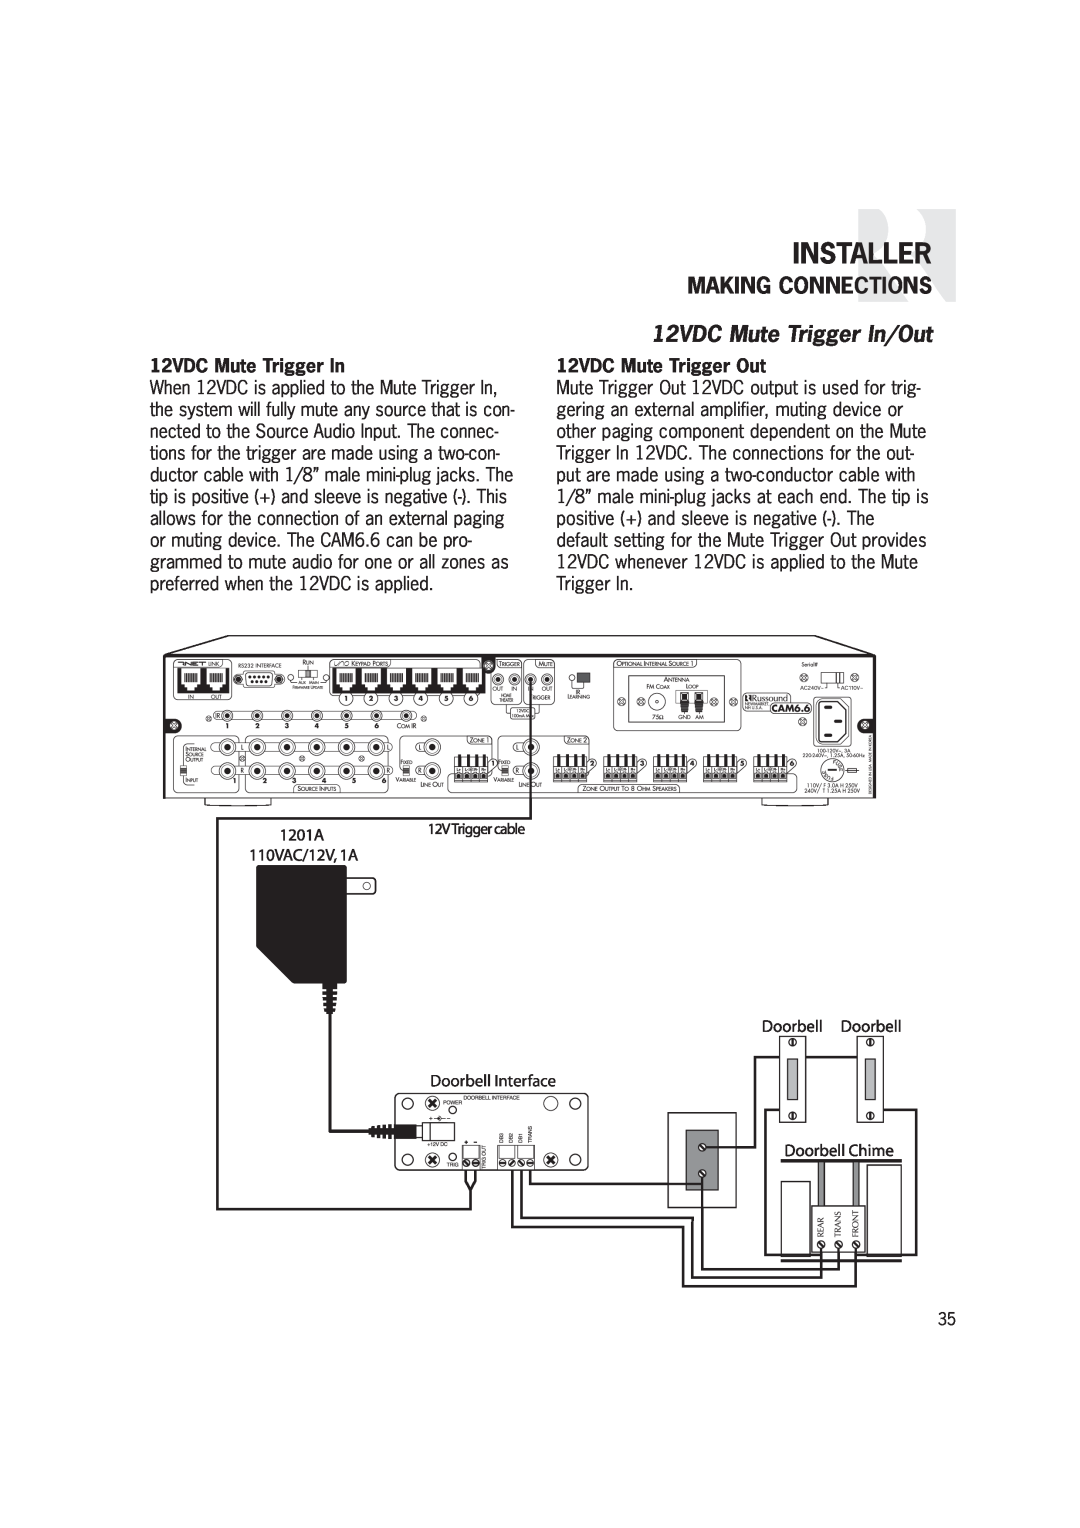 Russound CAM6.6T-S1 instruction manual 12VDC Mute Trigger In/Out, Installer, Making Connections, 12VDC Mute Trigger Out 